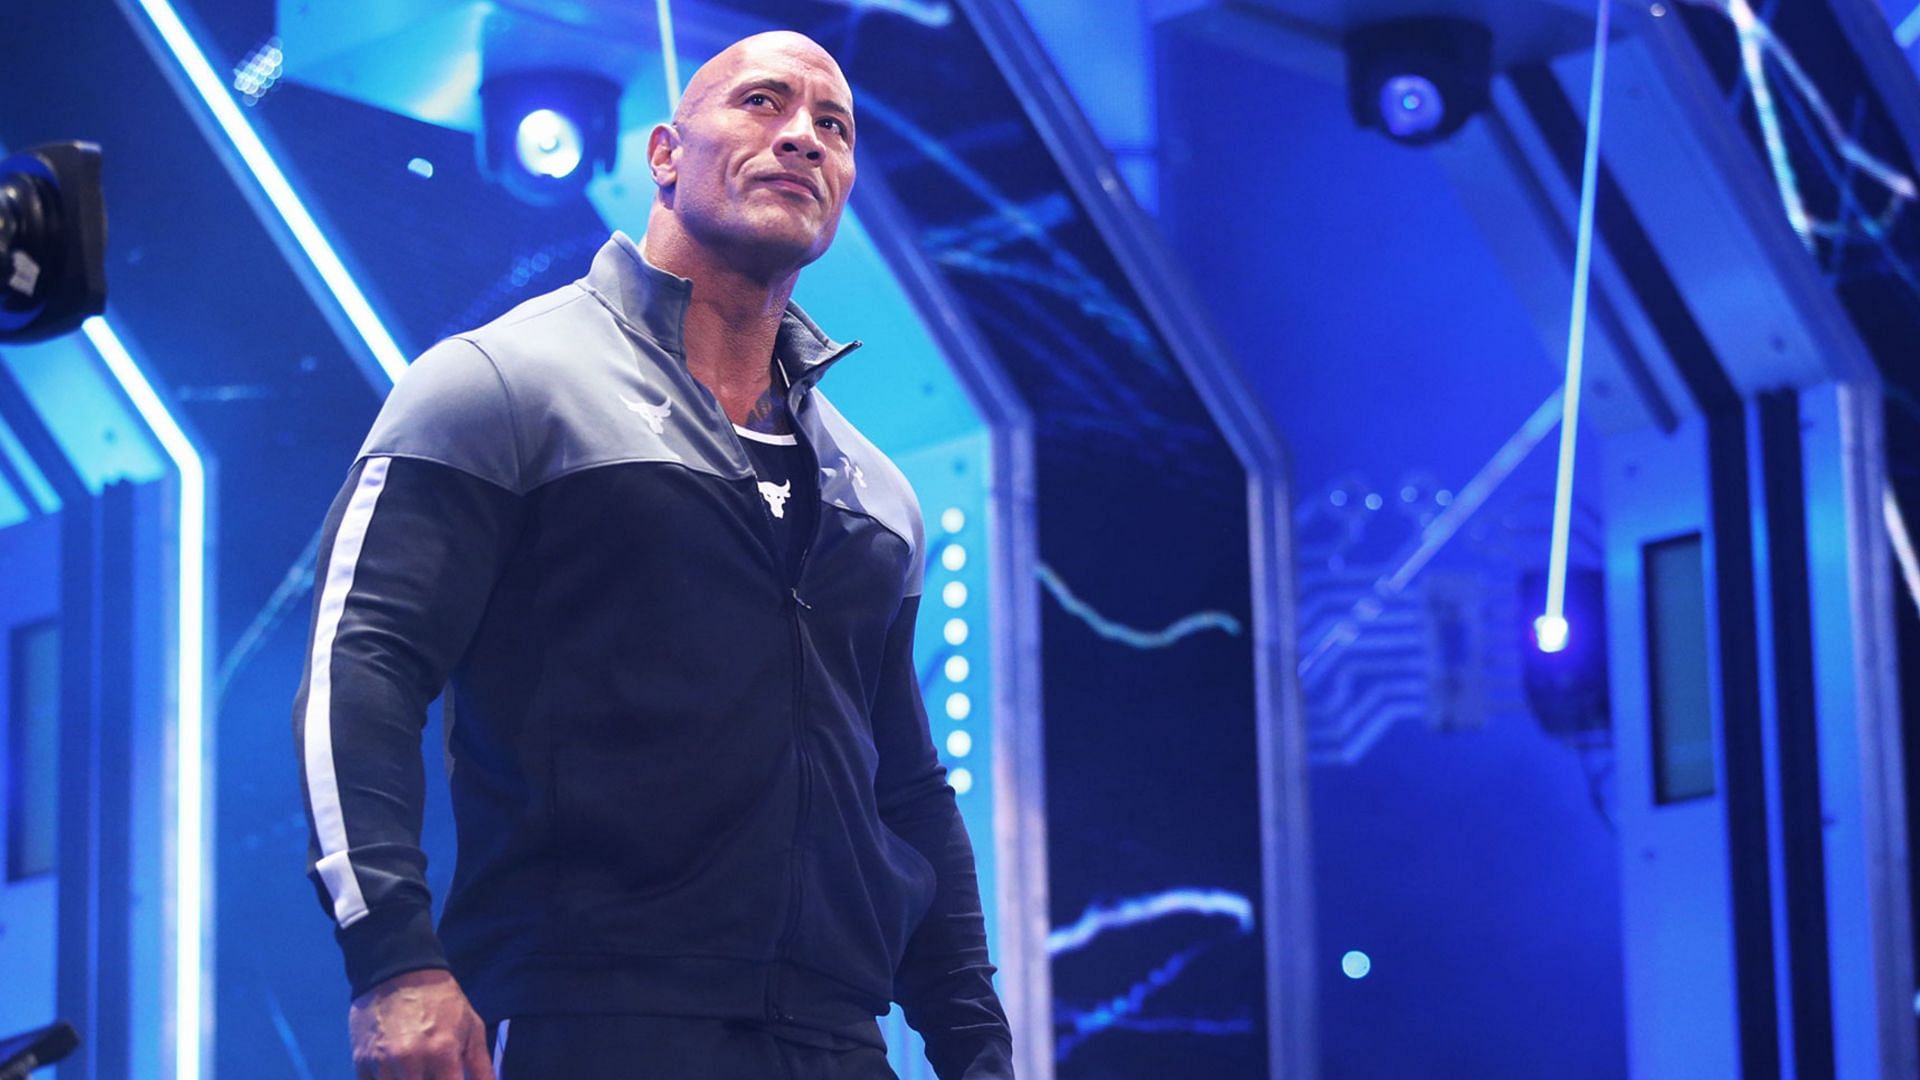 The Rock returned to WWE SmackDown last Friday